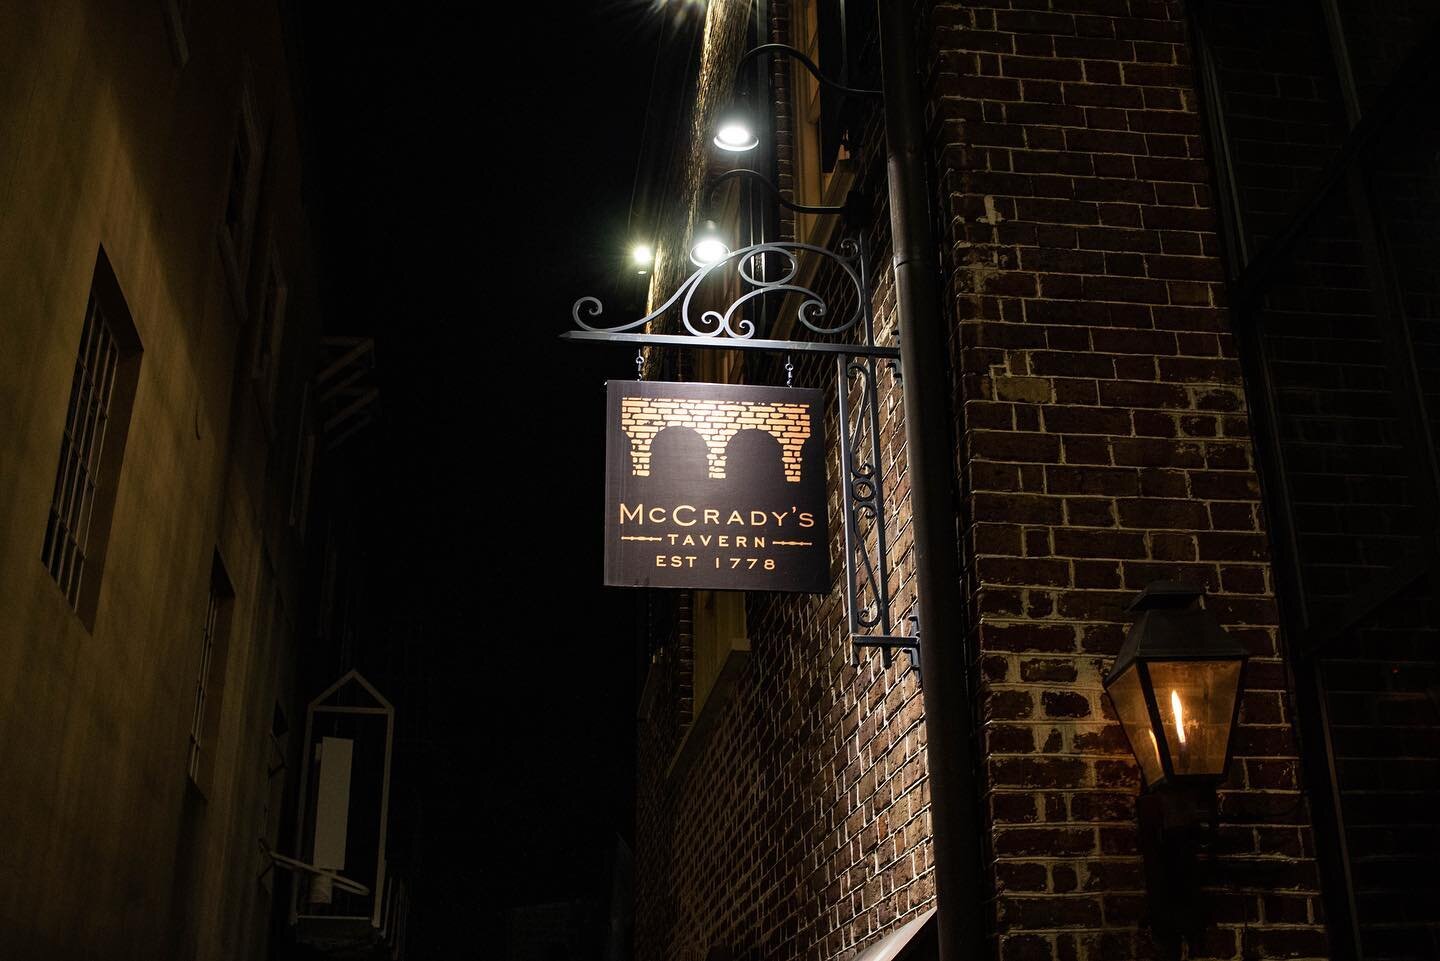 Charleston, South Carolina // a moment not affected by the passage of time. Gone but not forgotten. Missing the inventive cuisine from @mccradys and @mccradystavern tonight.